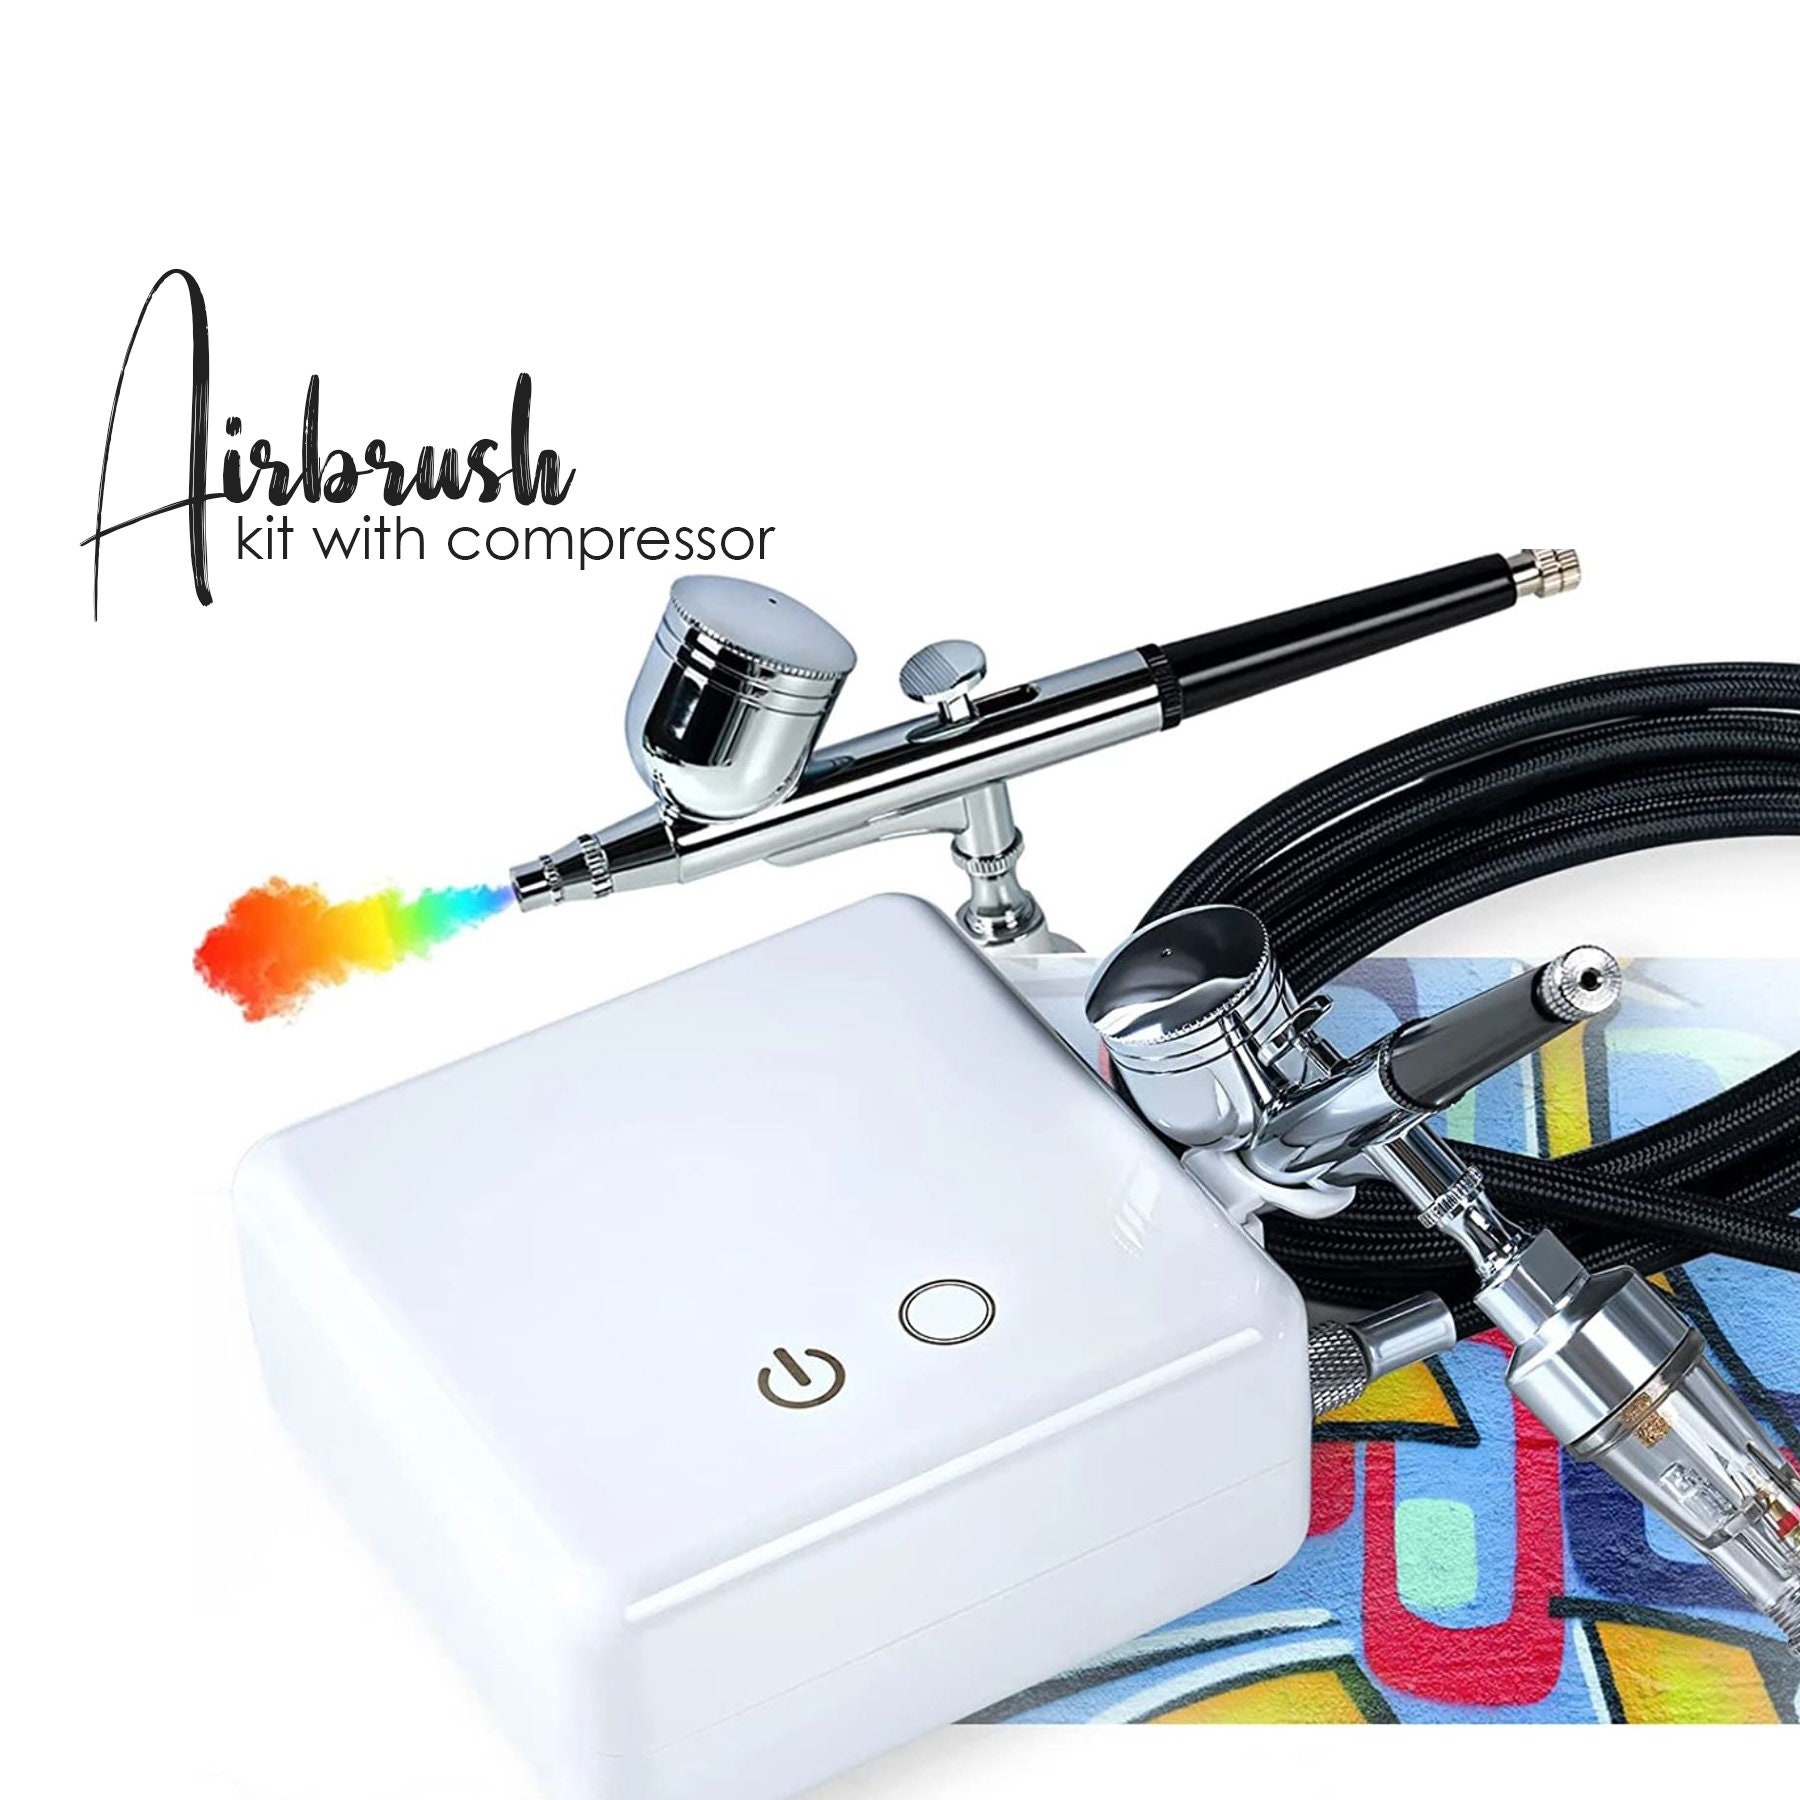 Airbrush and Mini Compressor Cake Decorating Kit Including 14 